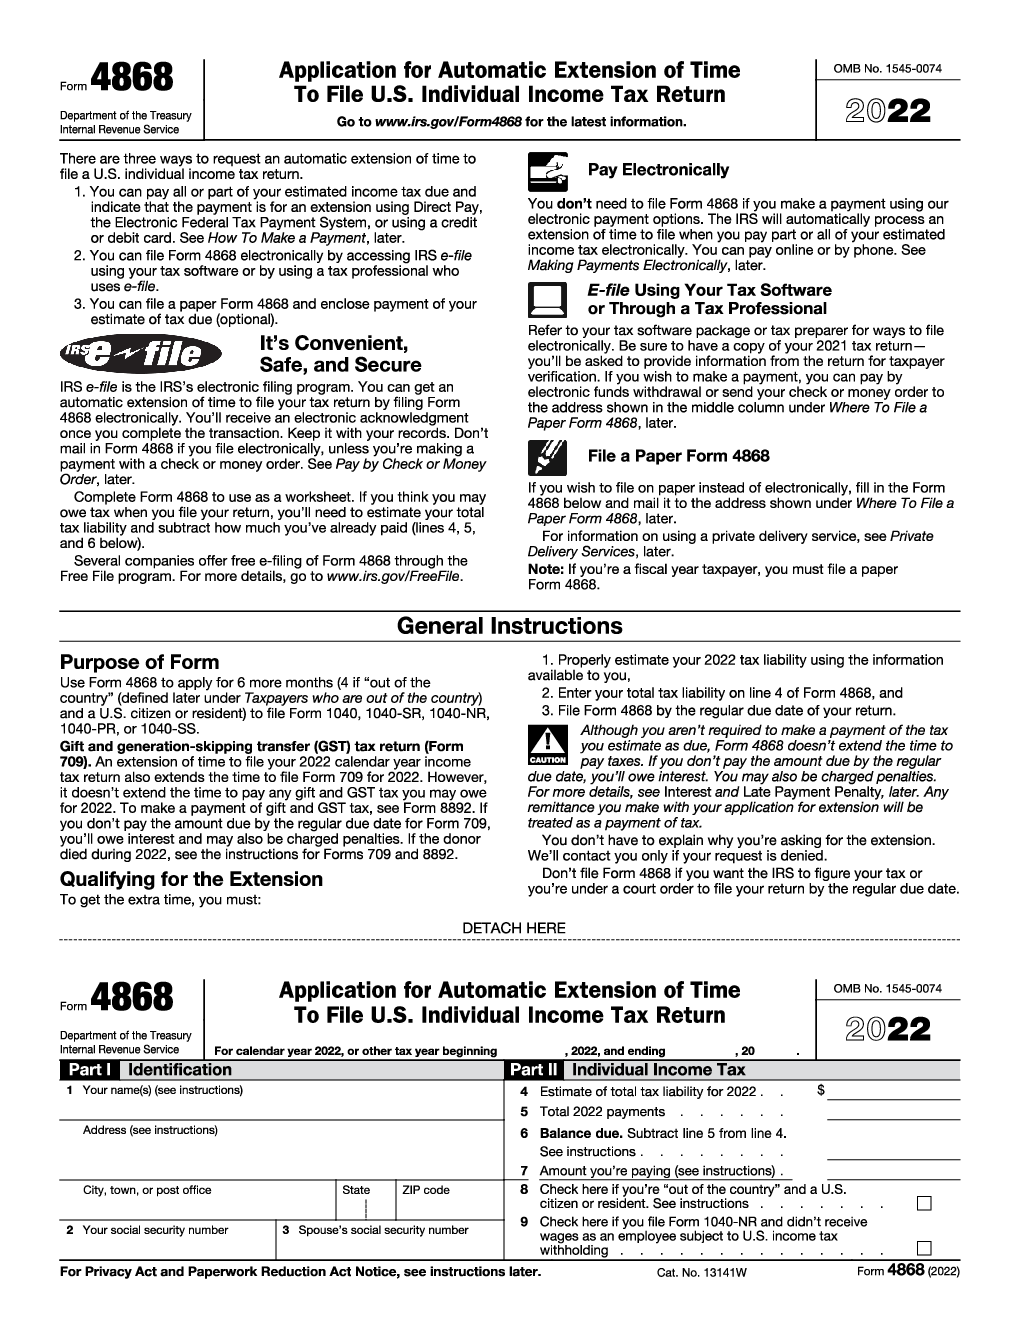 IRS Form 4868. Application for Automatic Extension of Time To File U.S. Individual Tax